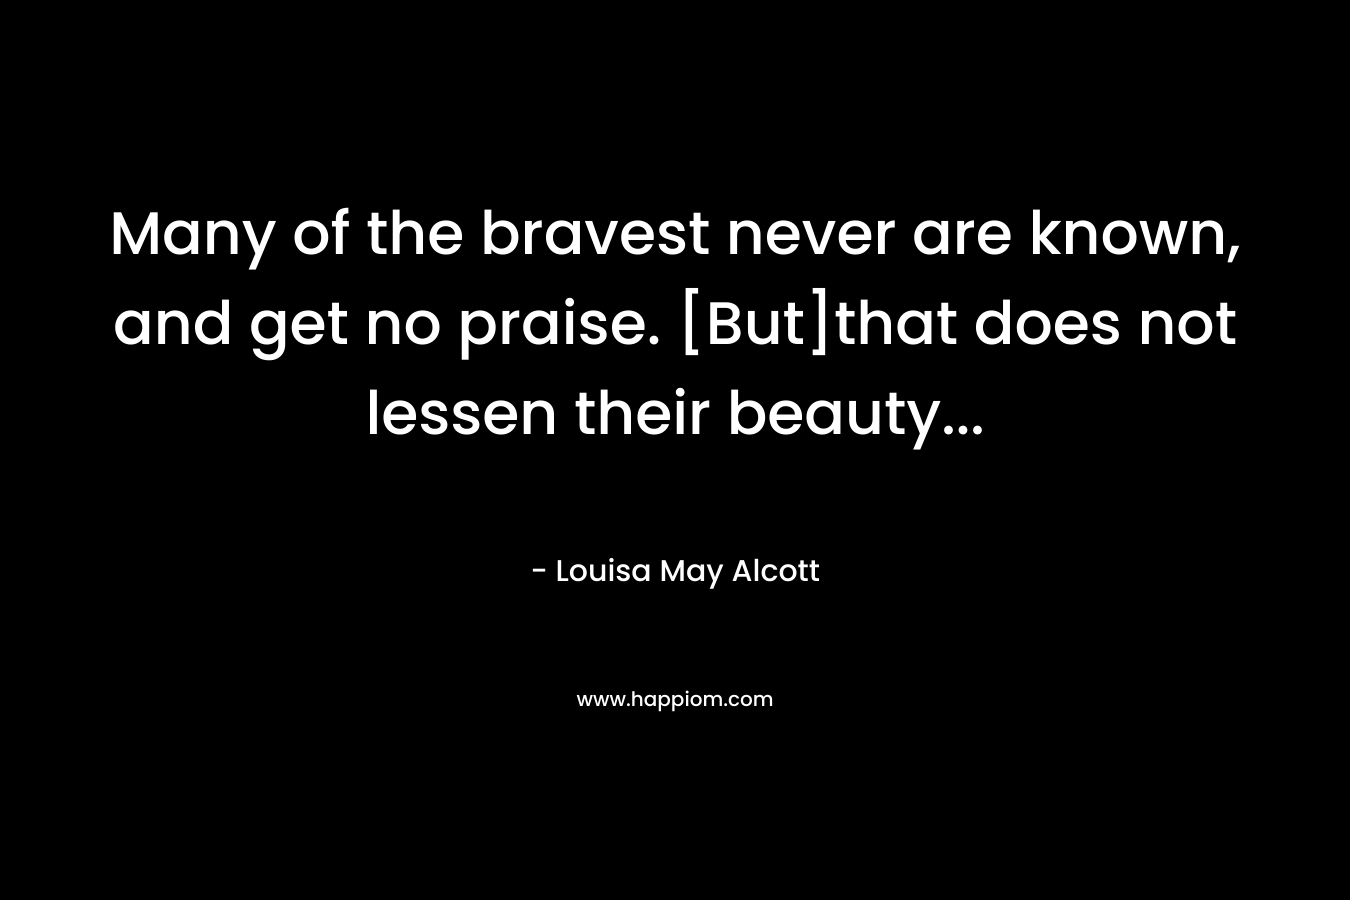 Many of the bravest never are known, and get no praise. [But]that does not lessen their beauty… – Louisa May Alcott